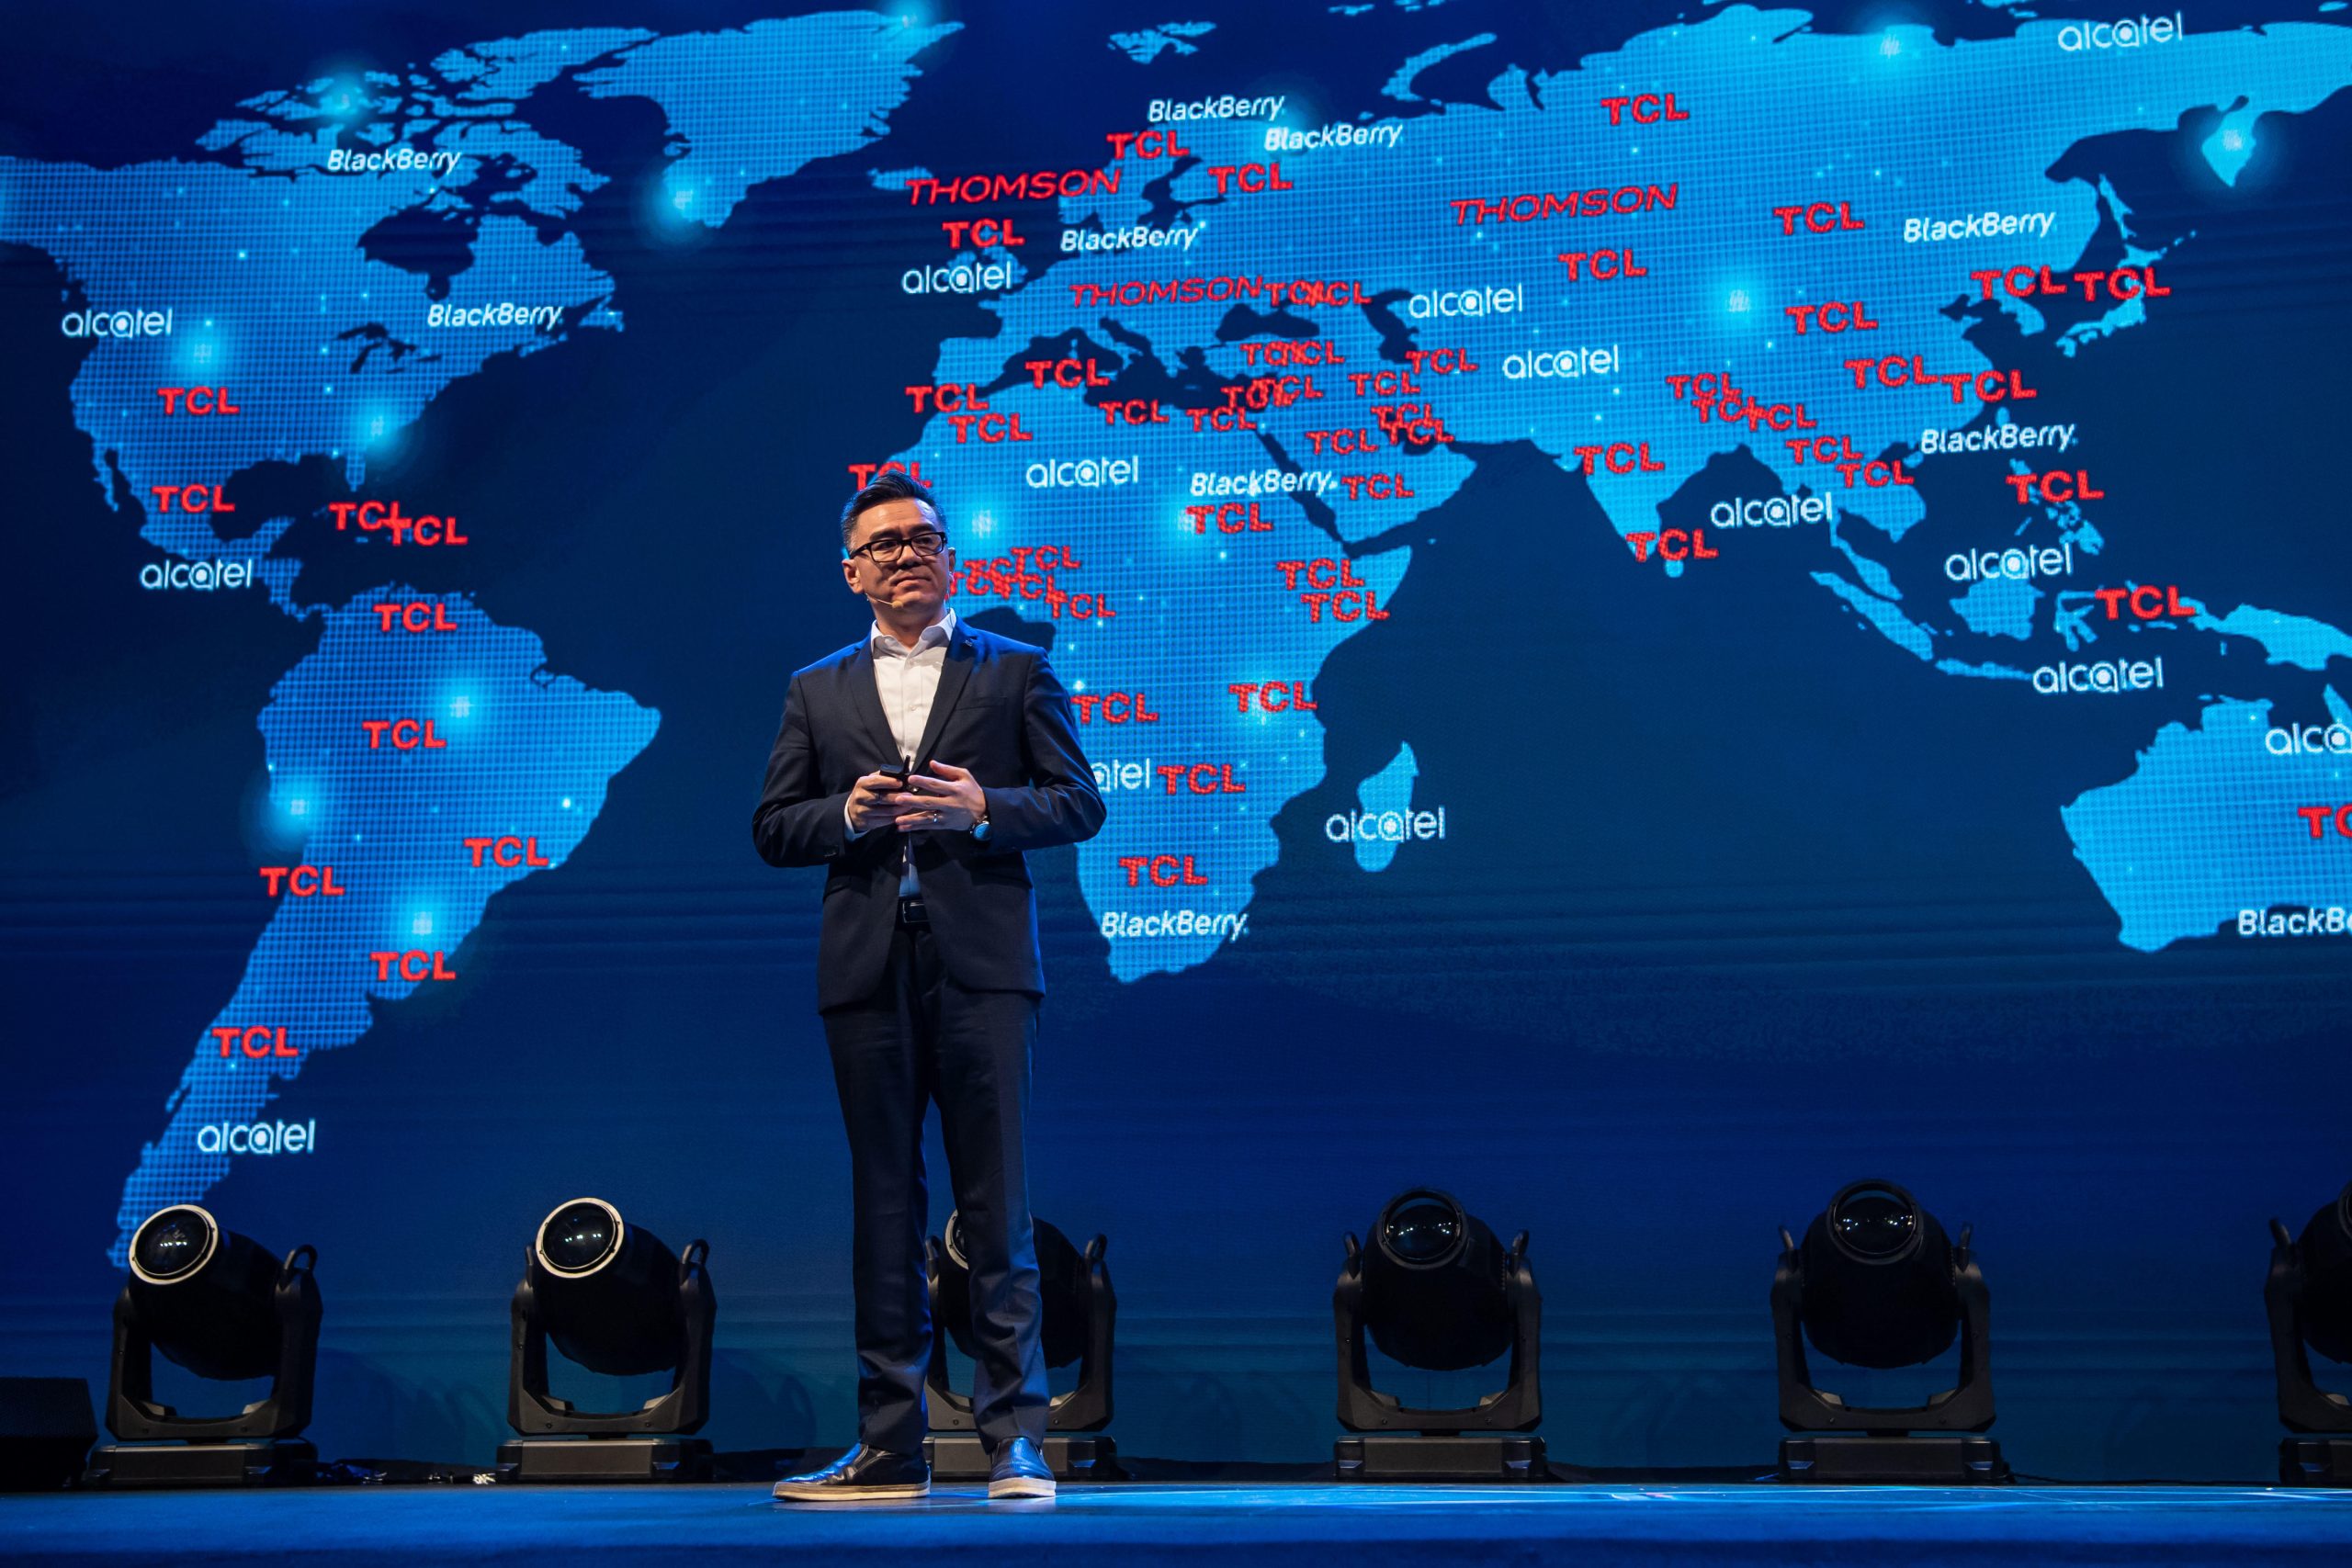 A man in a suit standing on a stage with a map of the world behind him.